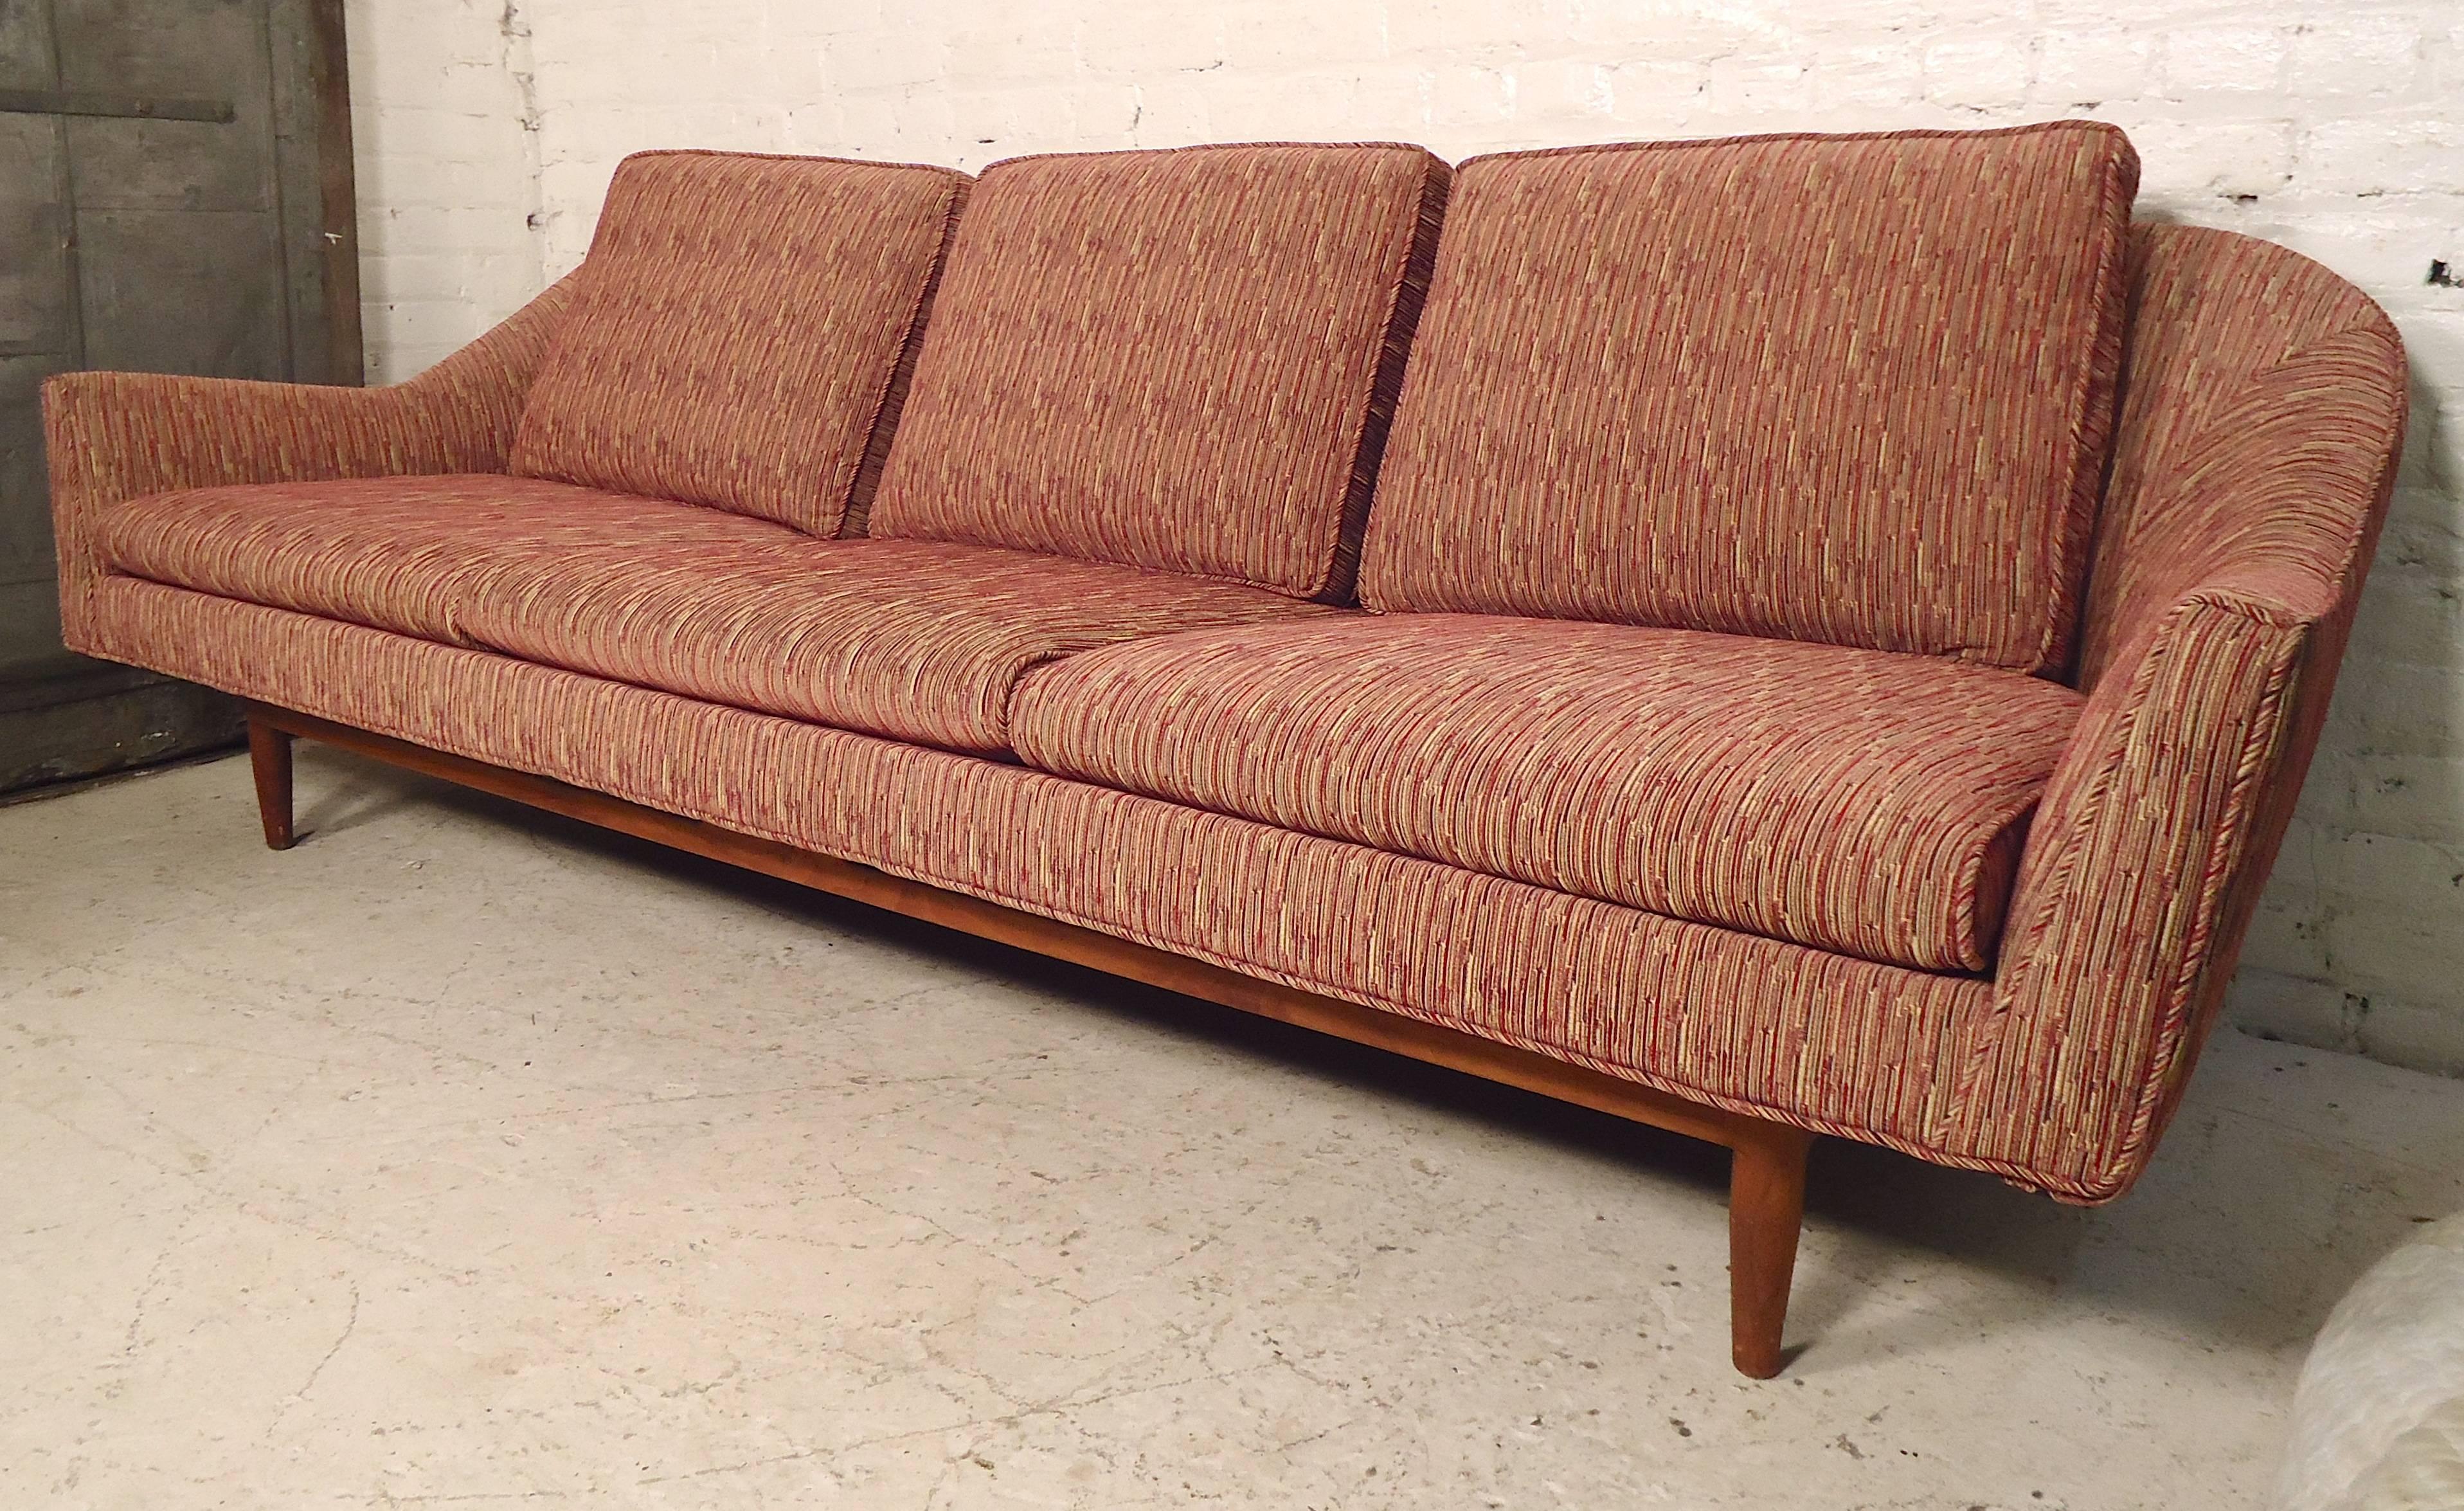 Beautiful curved back three-seat sofa by Jens Risom. Simple and elegant lines that feature a curved back, sculpted wood base and funky patterned upholstery.

(Please confirm item location NY or NJ with dealer).
                     